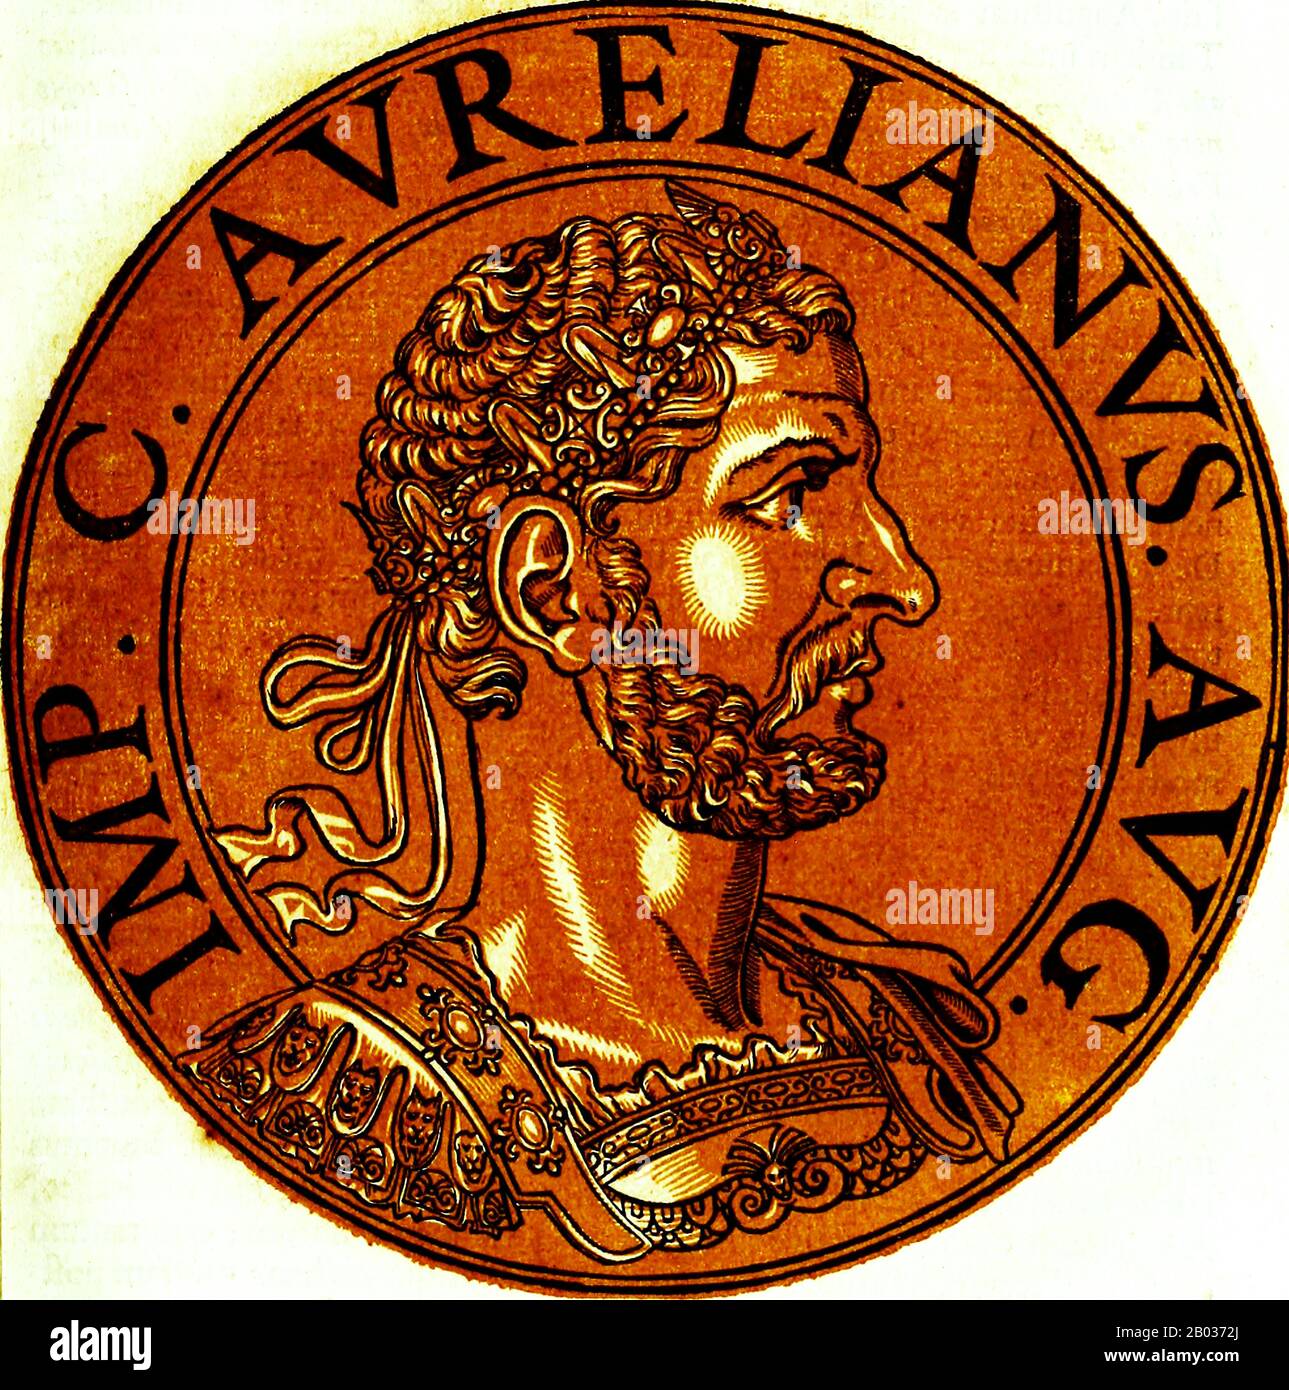 Aurelian (214/215-275 CE) rose from humble beginnings, and earned his way through the ranks of the Roman Army to a position of power and influence under Emperor Claudius Gothicus. After a brief few months when the throne was seized by Claudius' brother, Quintillus, after the former's death in 270, Aurelian ascended to become emperor by the will of his soldiers.  Like Claudius before him, Aurelian had inherited an Empire that had been effectively broken into three pieces, with the Gallic Empire in the West and the Palmyrene Empire to the East. Various Germanic and barbarian tribes also threaten Stock Photo